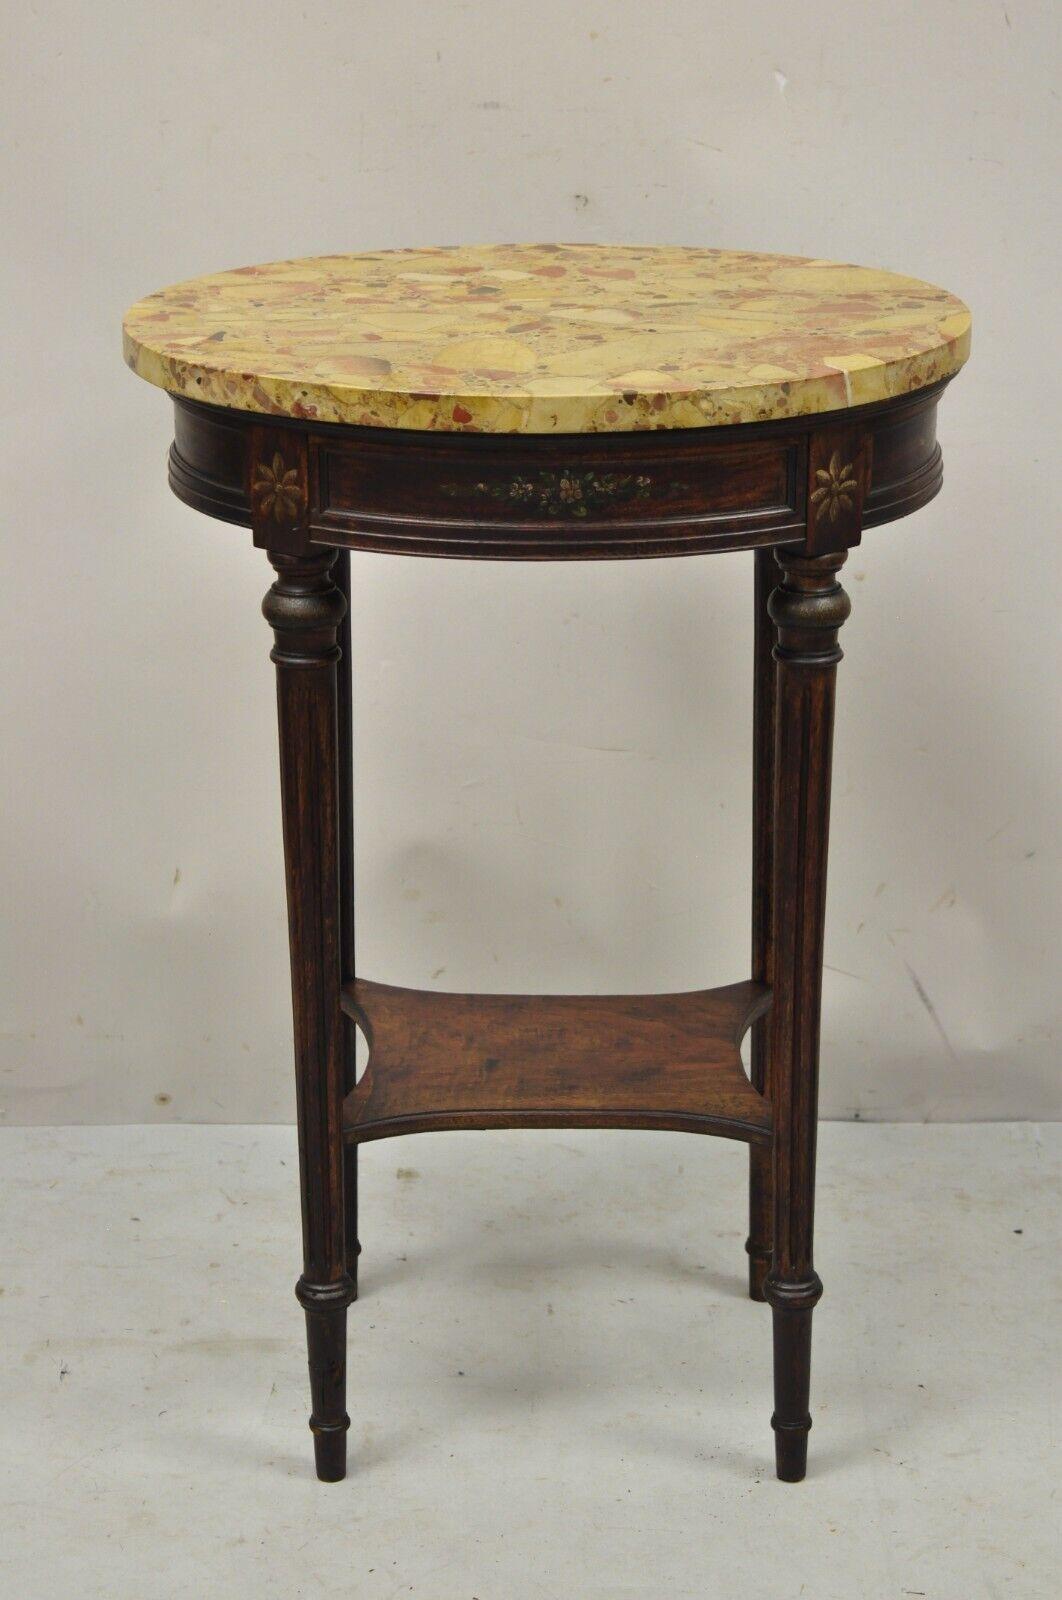 Vintage French Louis XVI style Victorian oval marble top accent side table. Item features an oval rouge marble top, hand painted floral details, lower shelf, great style and form. Circa Early 1900s. Measurements: 29